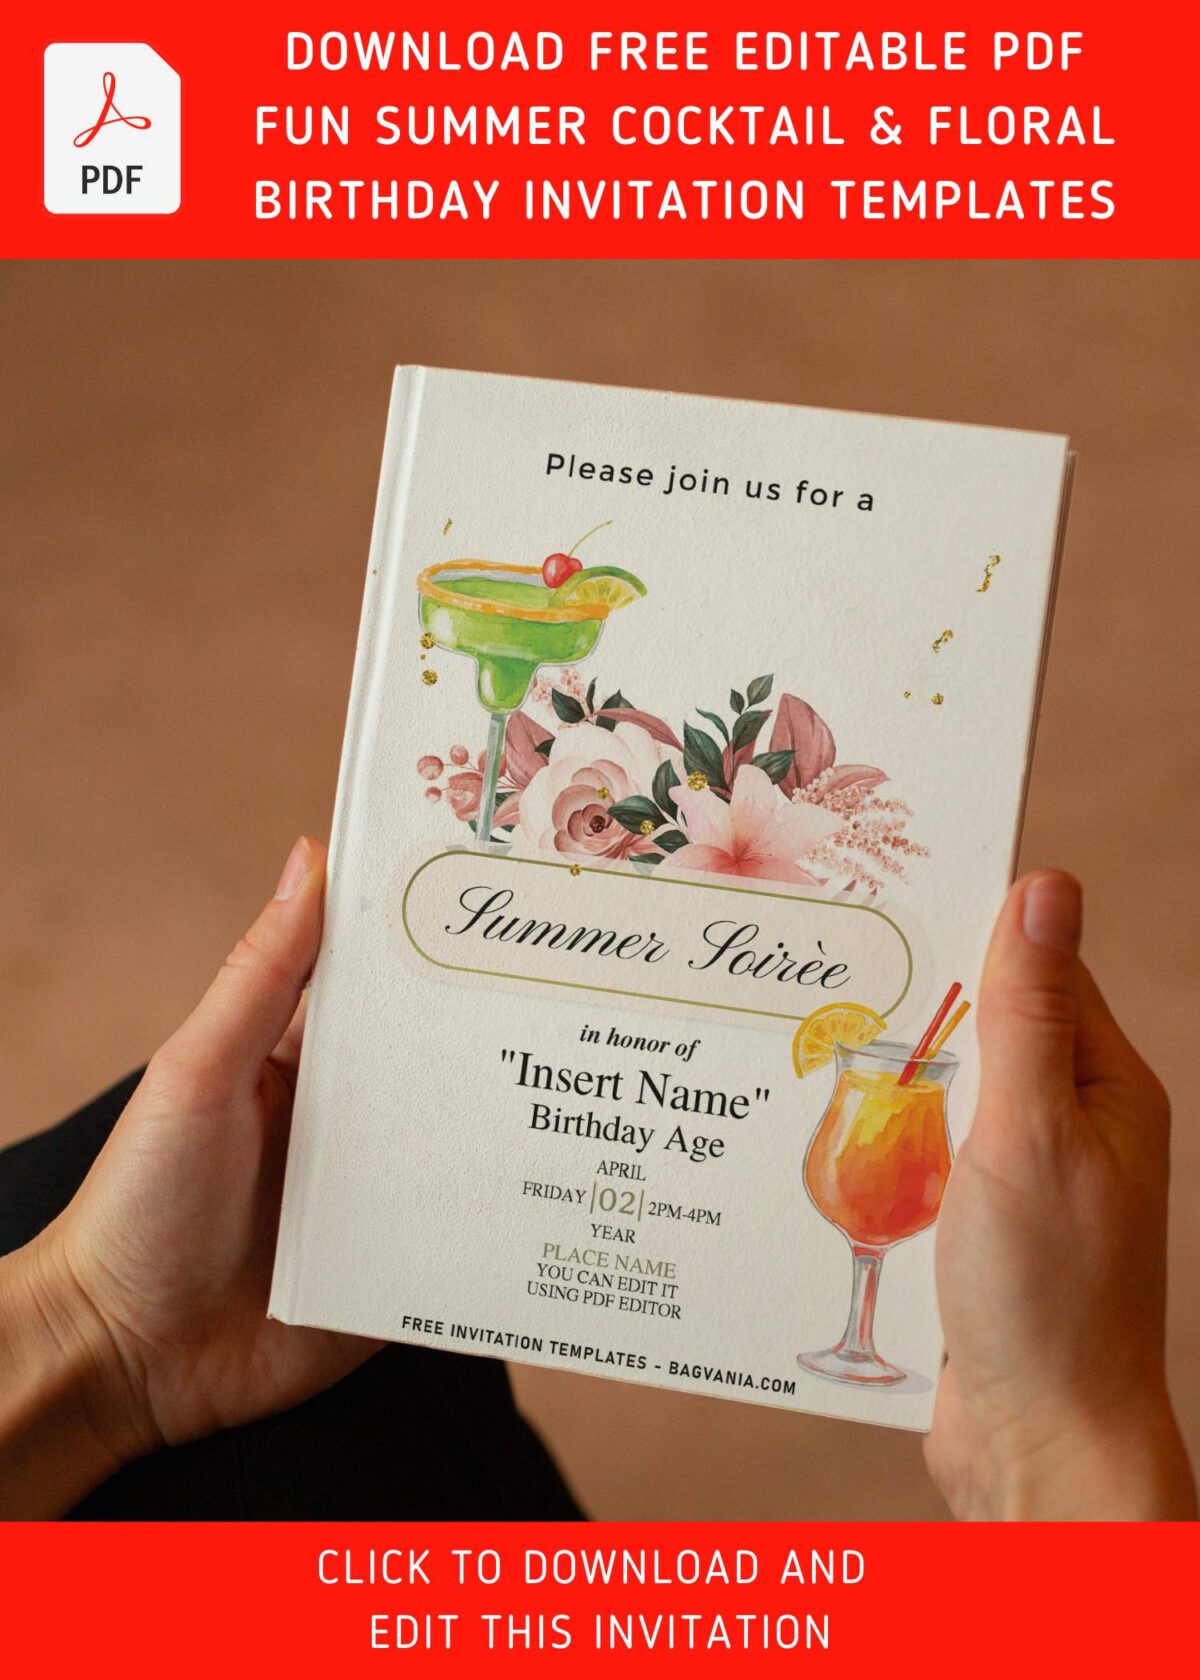 (Free Editable PDF) Fun Summer Soiree Invitation Templates That You Don't Want To Miss with white rose